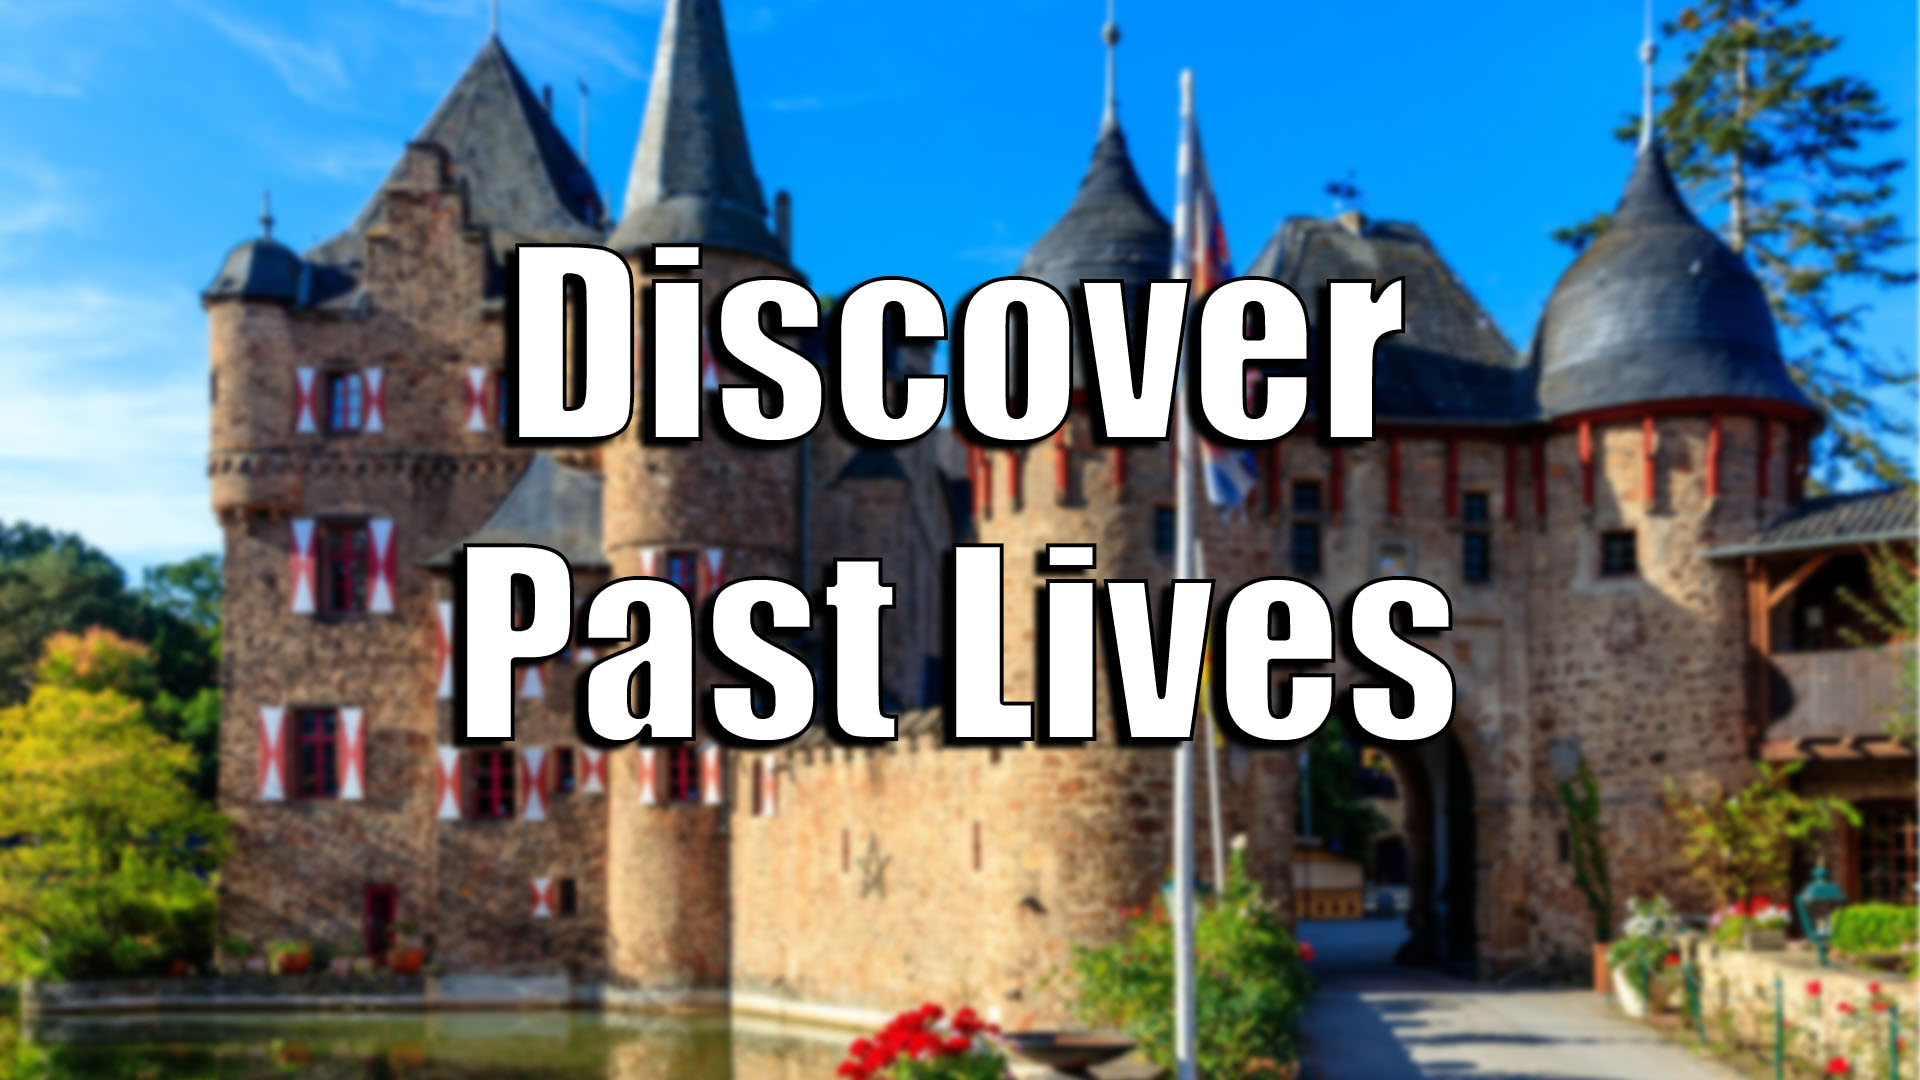 Seven Great Reasons to Know Your Past Lives